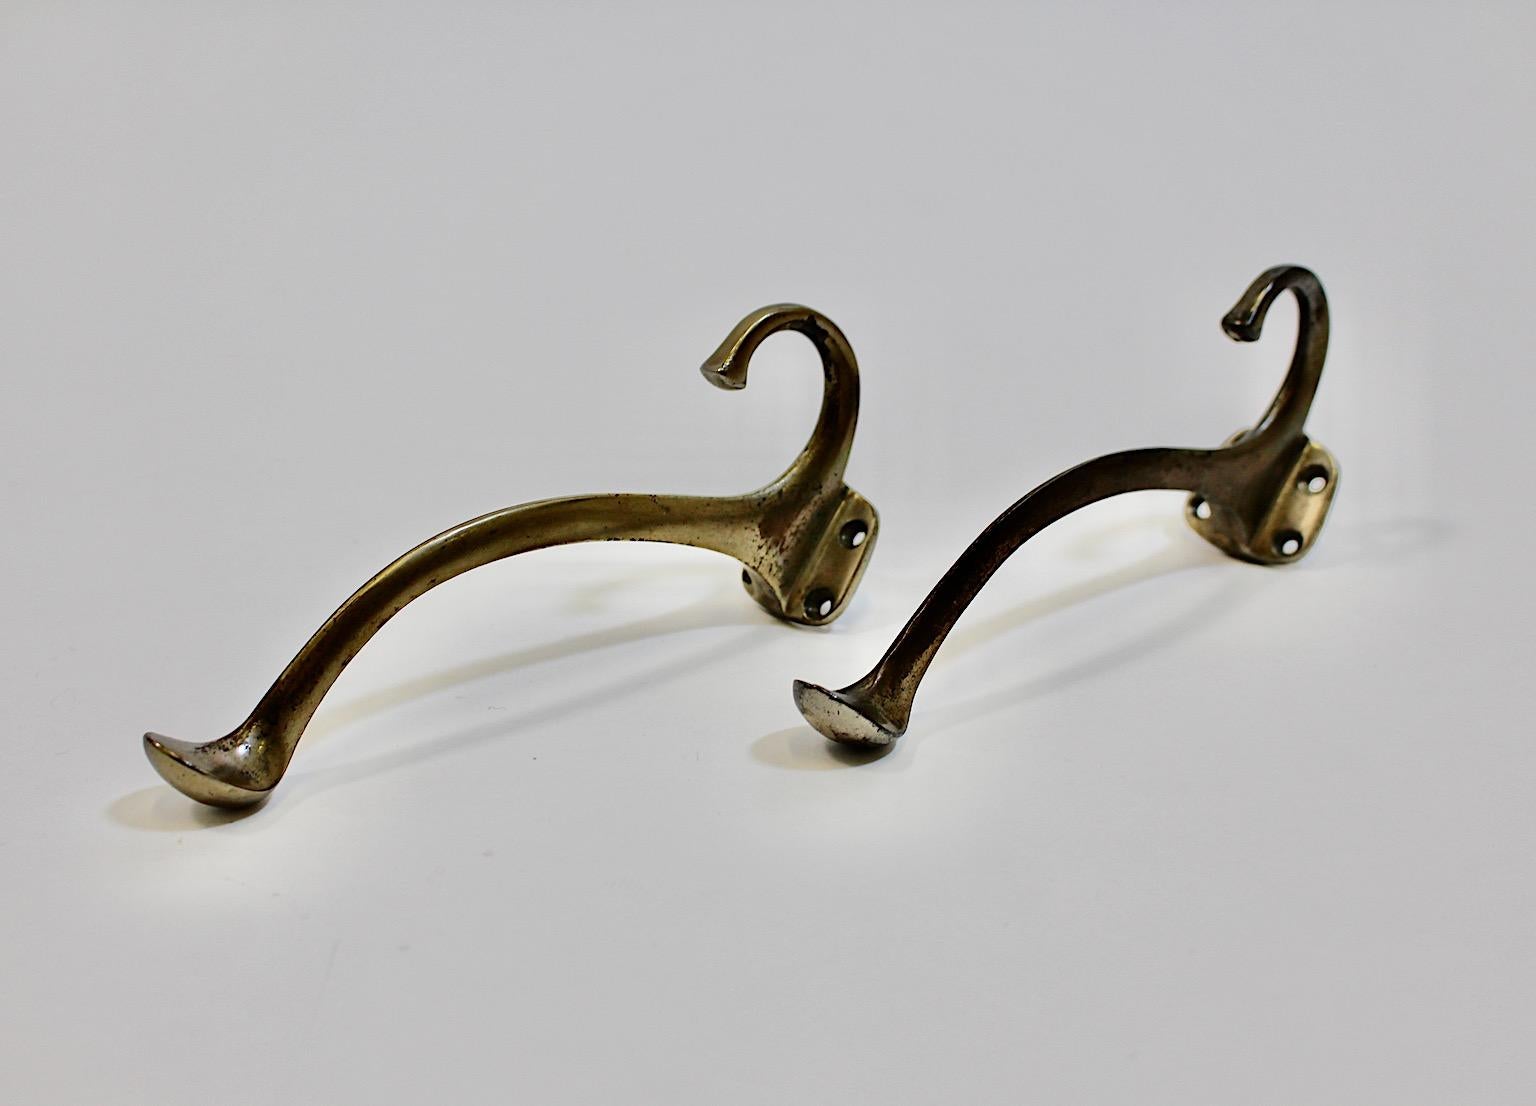 Jugendstil vintage pair of coat hooks duo coat hooks from nickel plated metal circa 1915 Vienna.
An amazing and elegant duo or pair of coat hooks from nickel plated metal slightly curved circa 1915 Vienna.
These wall mounted hooks are easy to